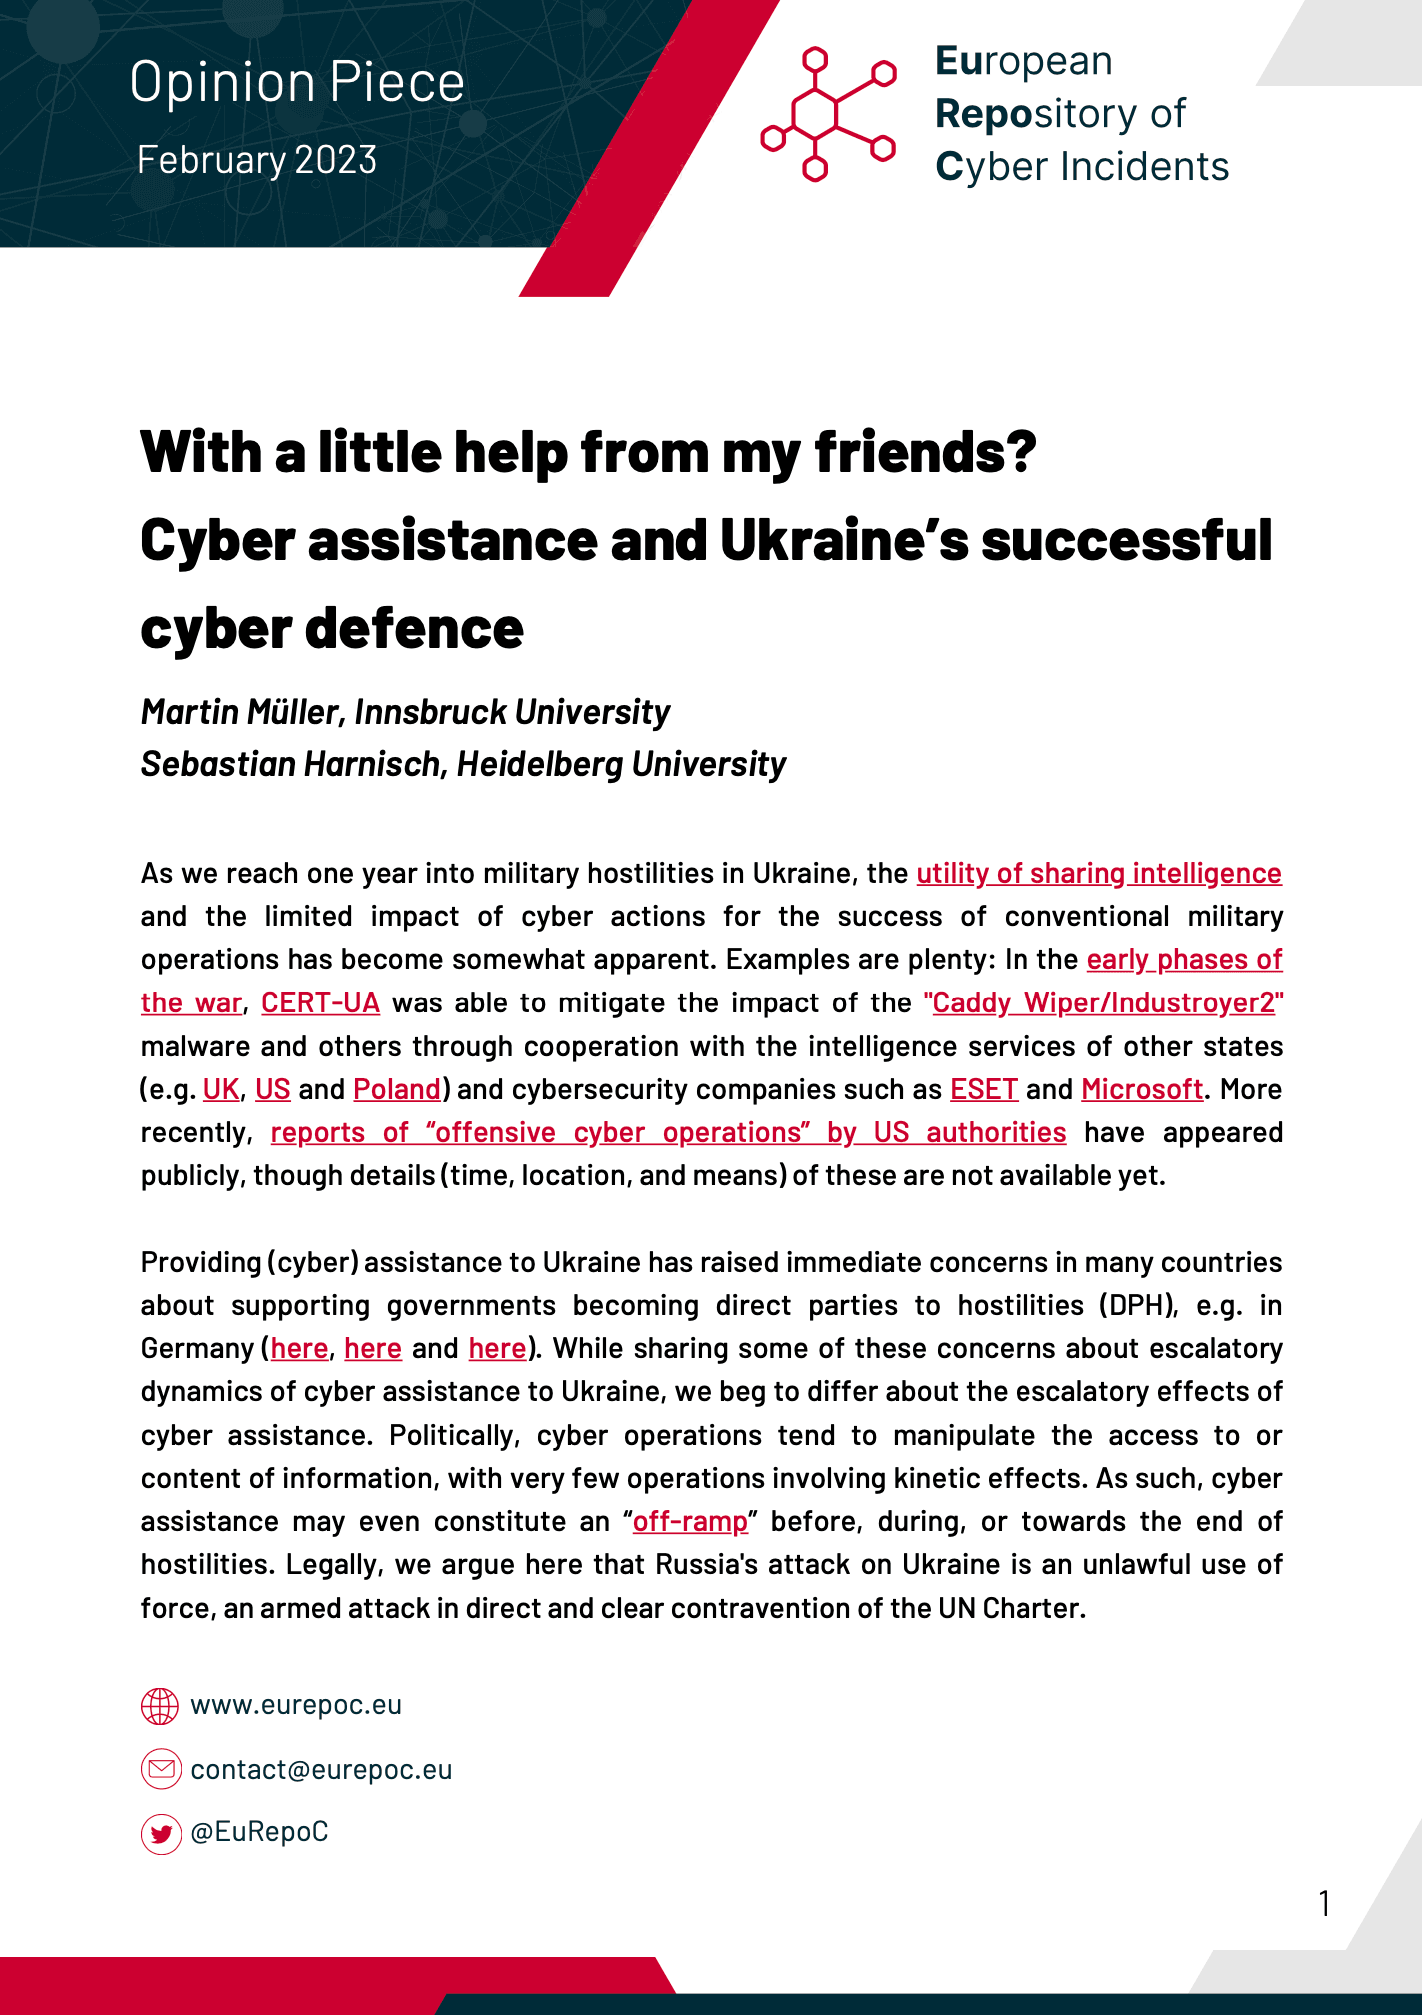 With a little help from my friends? Cyber assistance and Ukraine’s successful cyber defence